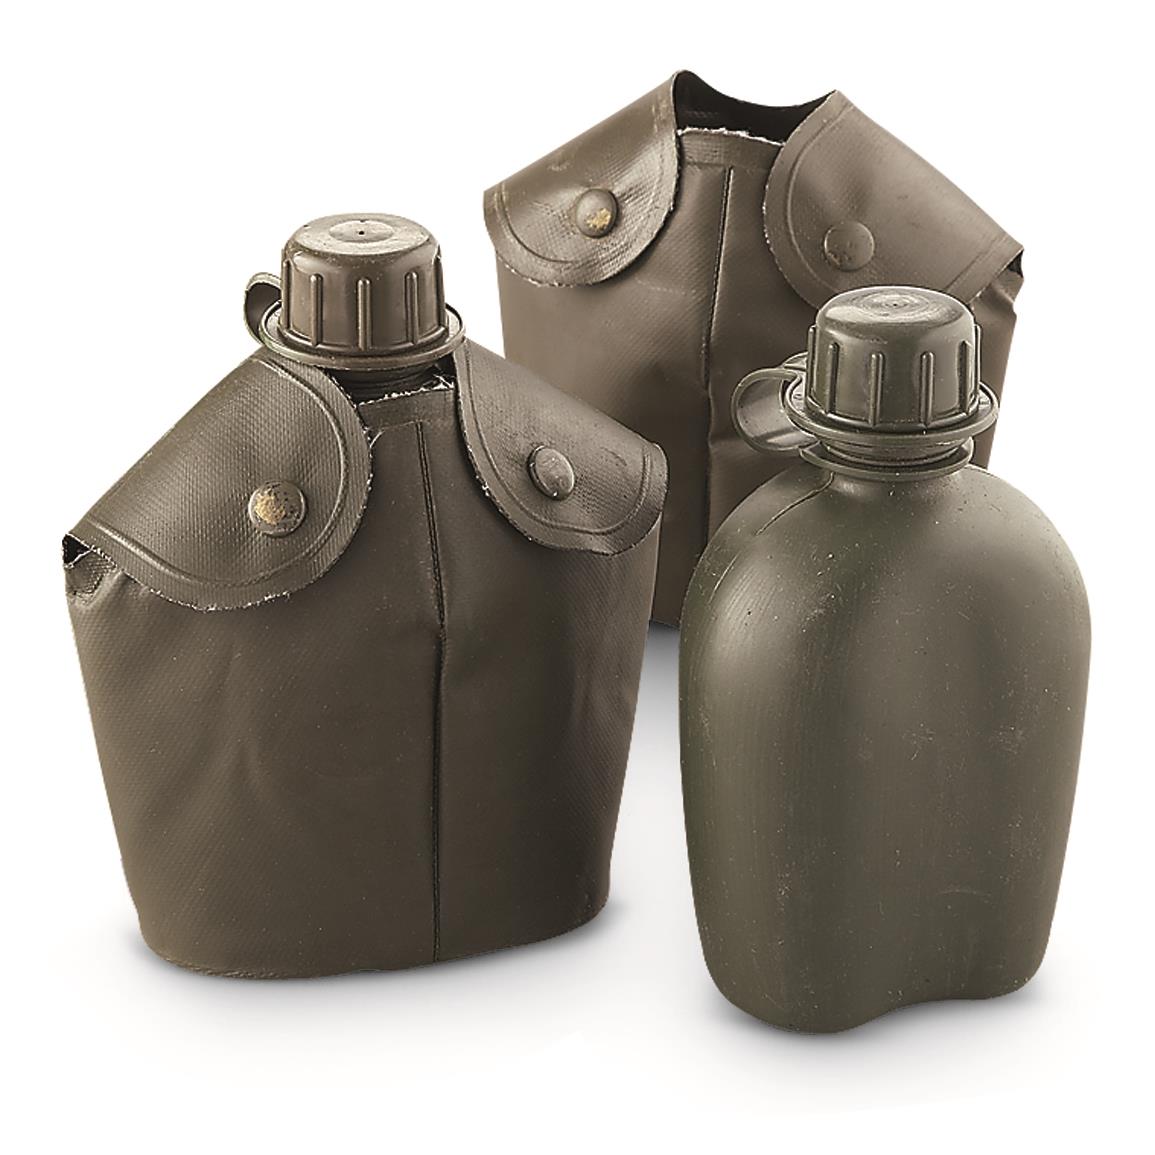 Dutch Military Surplus Canteens with Covers